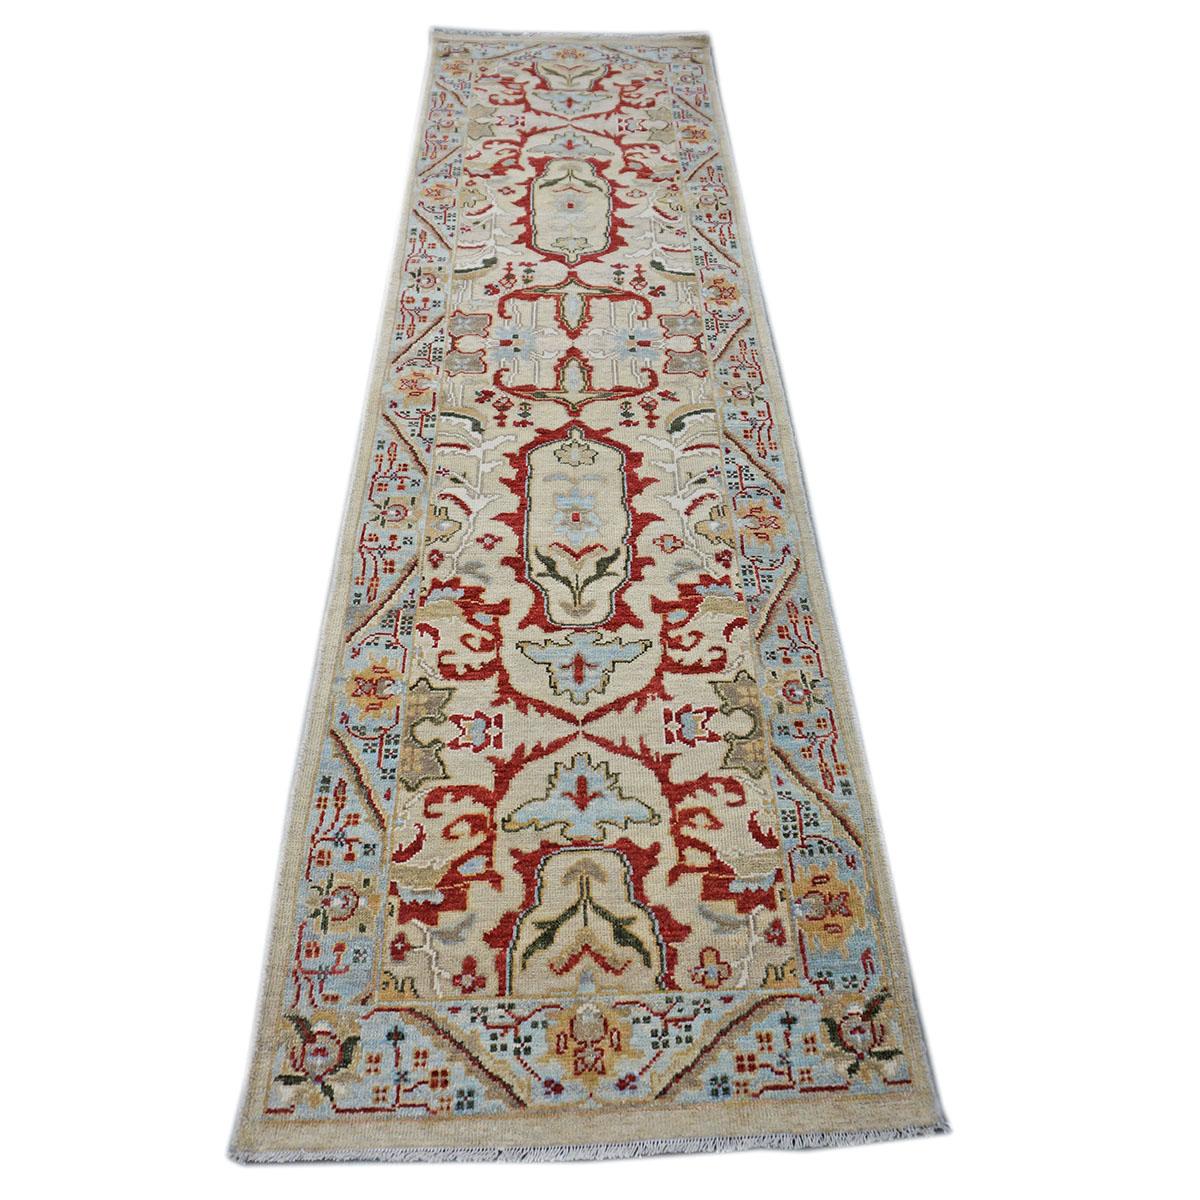 Ashly Fine Rugs presents an antique recreation of an original Afghan Sultanabad hallway runner rug. Persian Sultanabads are perhaps the most desired rugs by both connoisseurs and interior designers. Made with all vegetable-dyed, handspun wool and